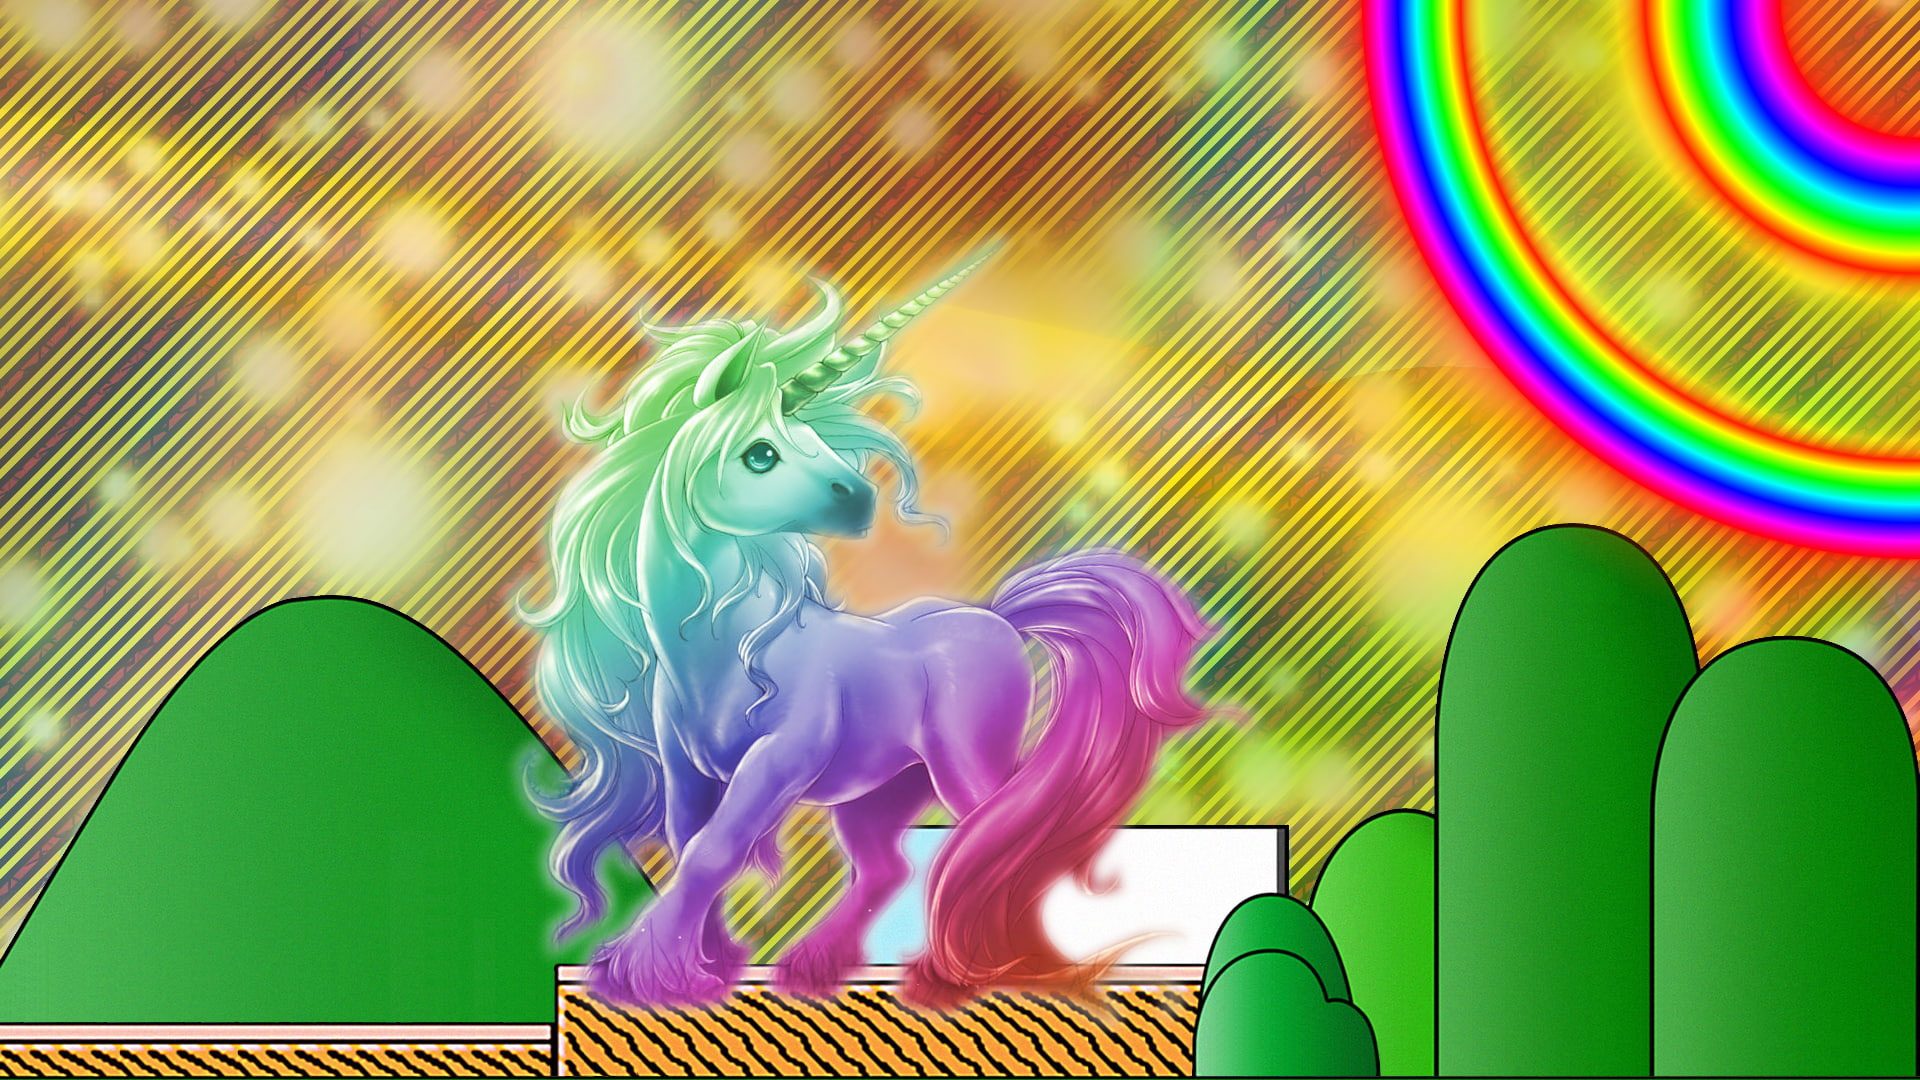 Wallpaper Animal, Horse, Magical, Psychedelic, Unicorn